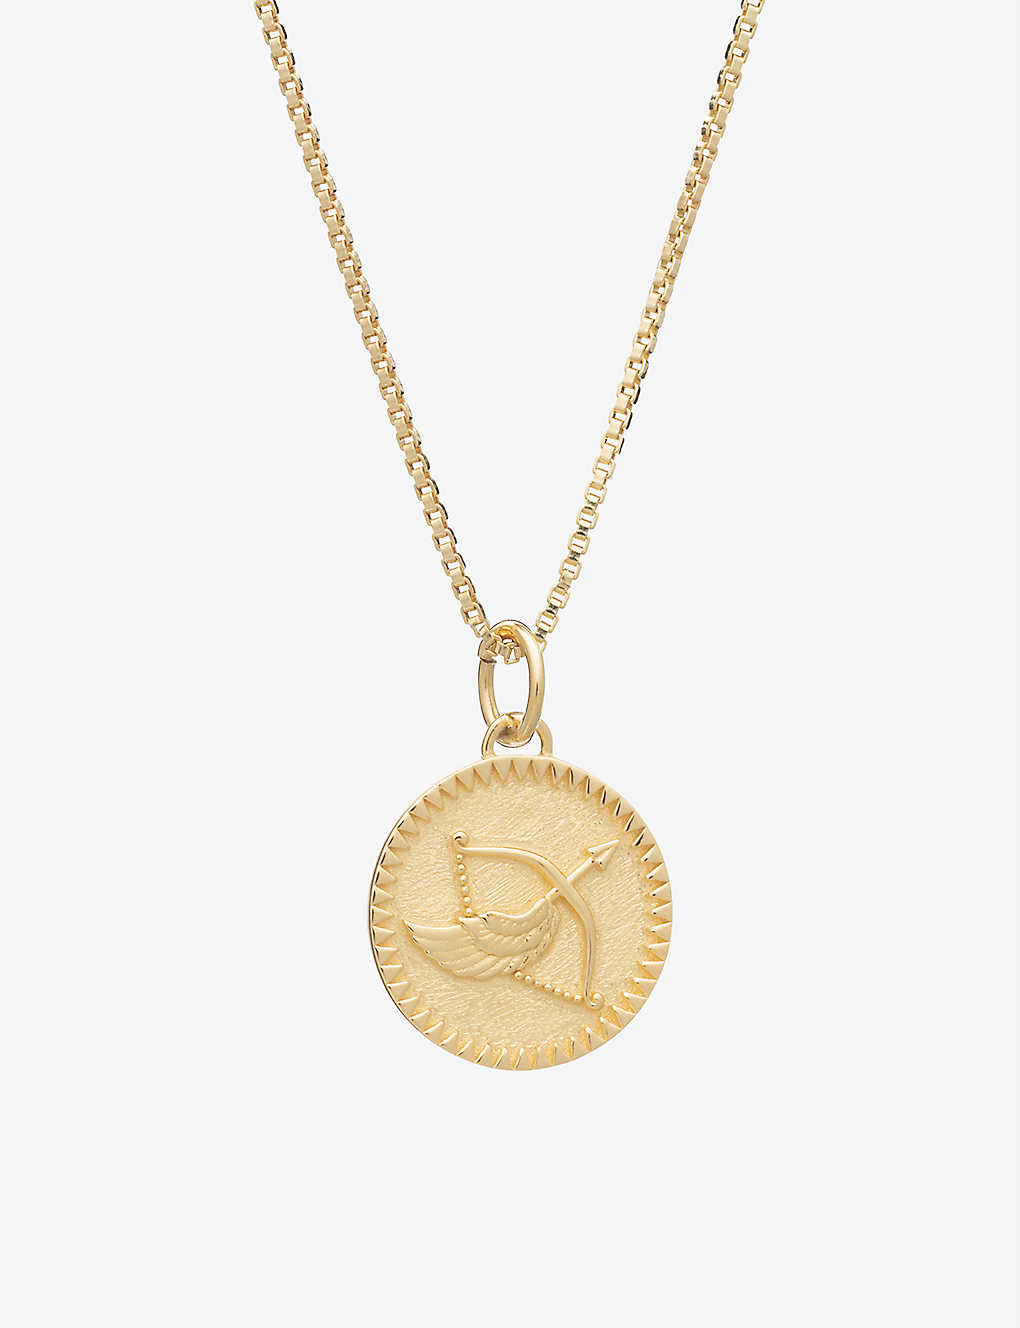 Rachel Jackson Zodiac Coin Sagittarius Short 22ct Gold-plated Sterling Silver Necklace In 22 Carat Gold Plated